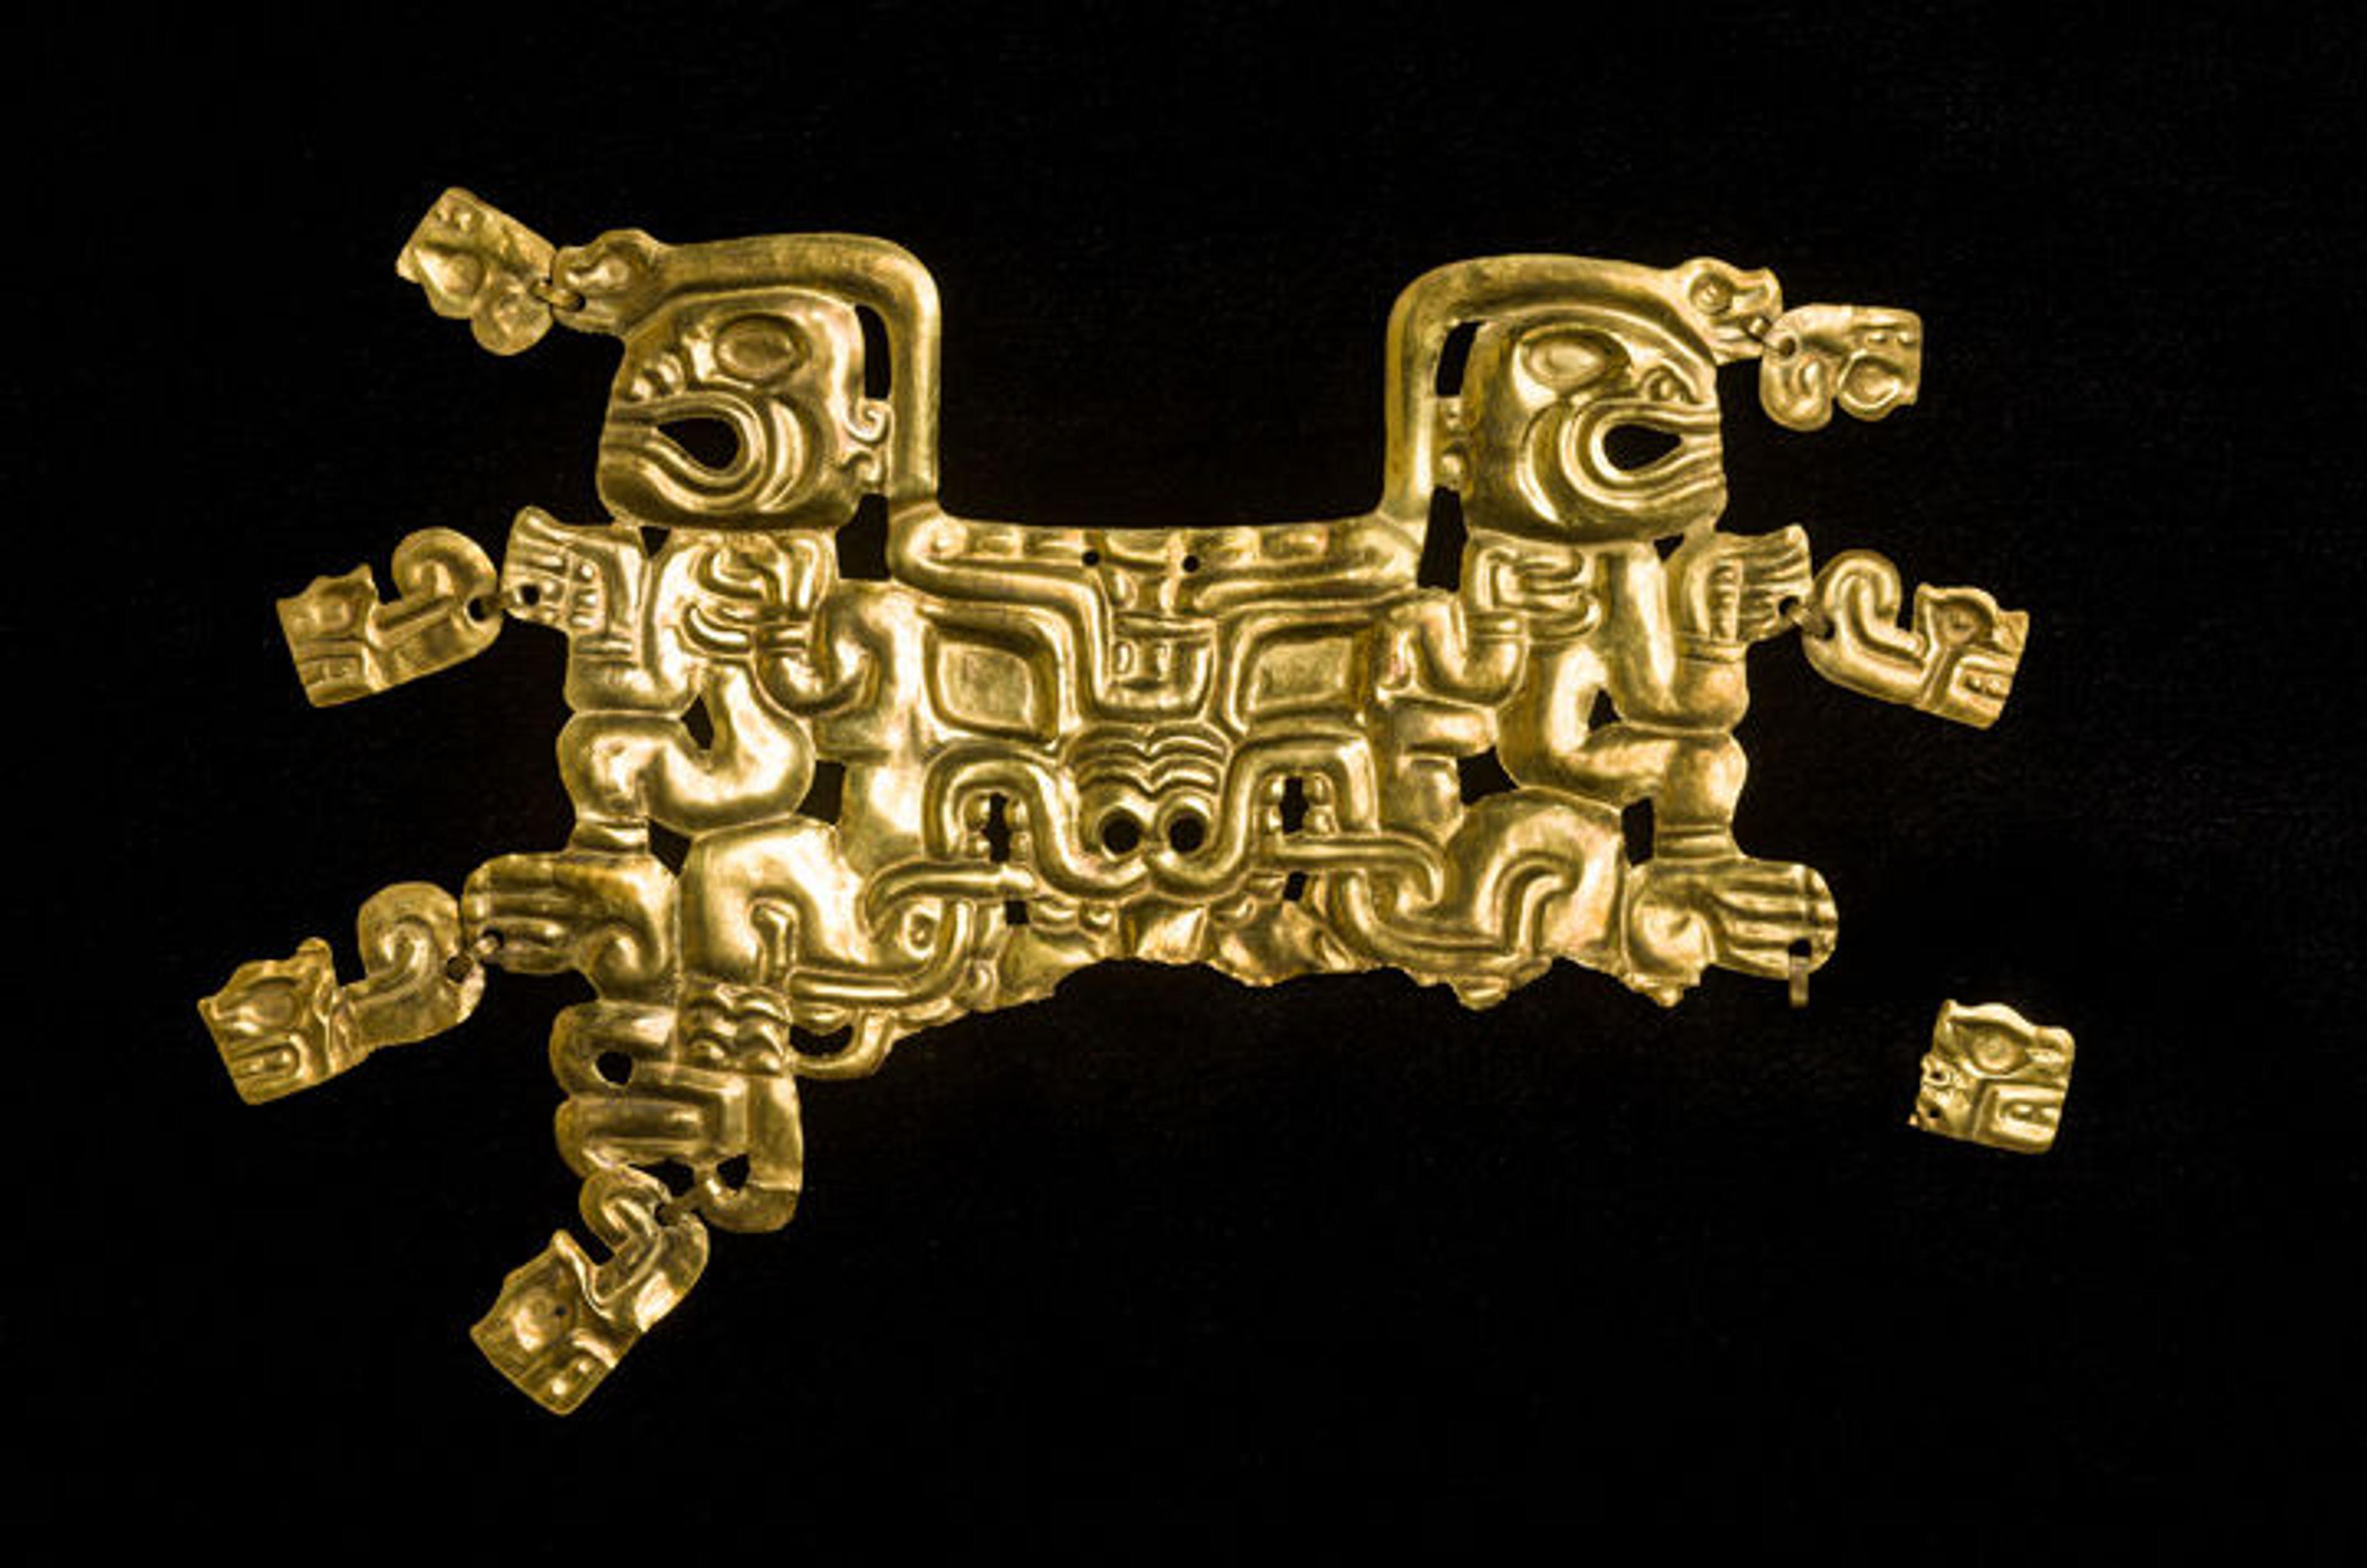 A gold mouth mask depicting a feline creature and human figures, made by the Cupisnique-Chavín peoples sometime between 800 and 550 B.C. 